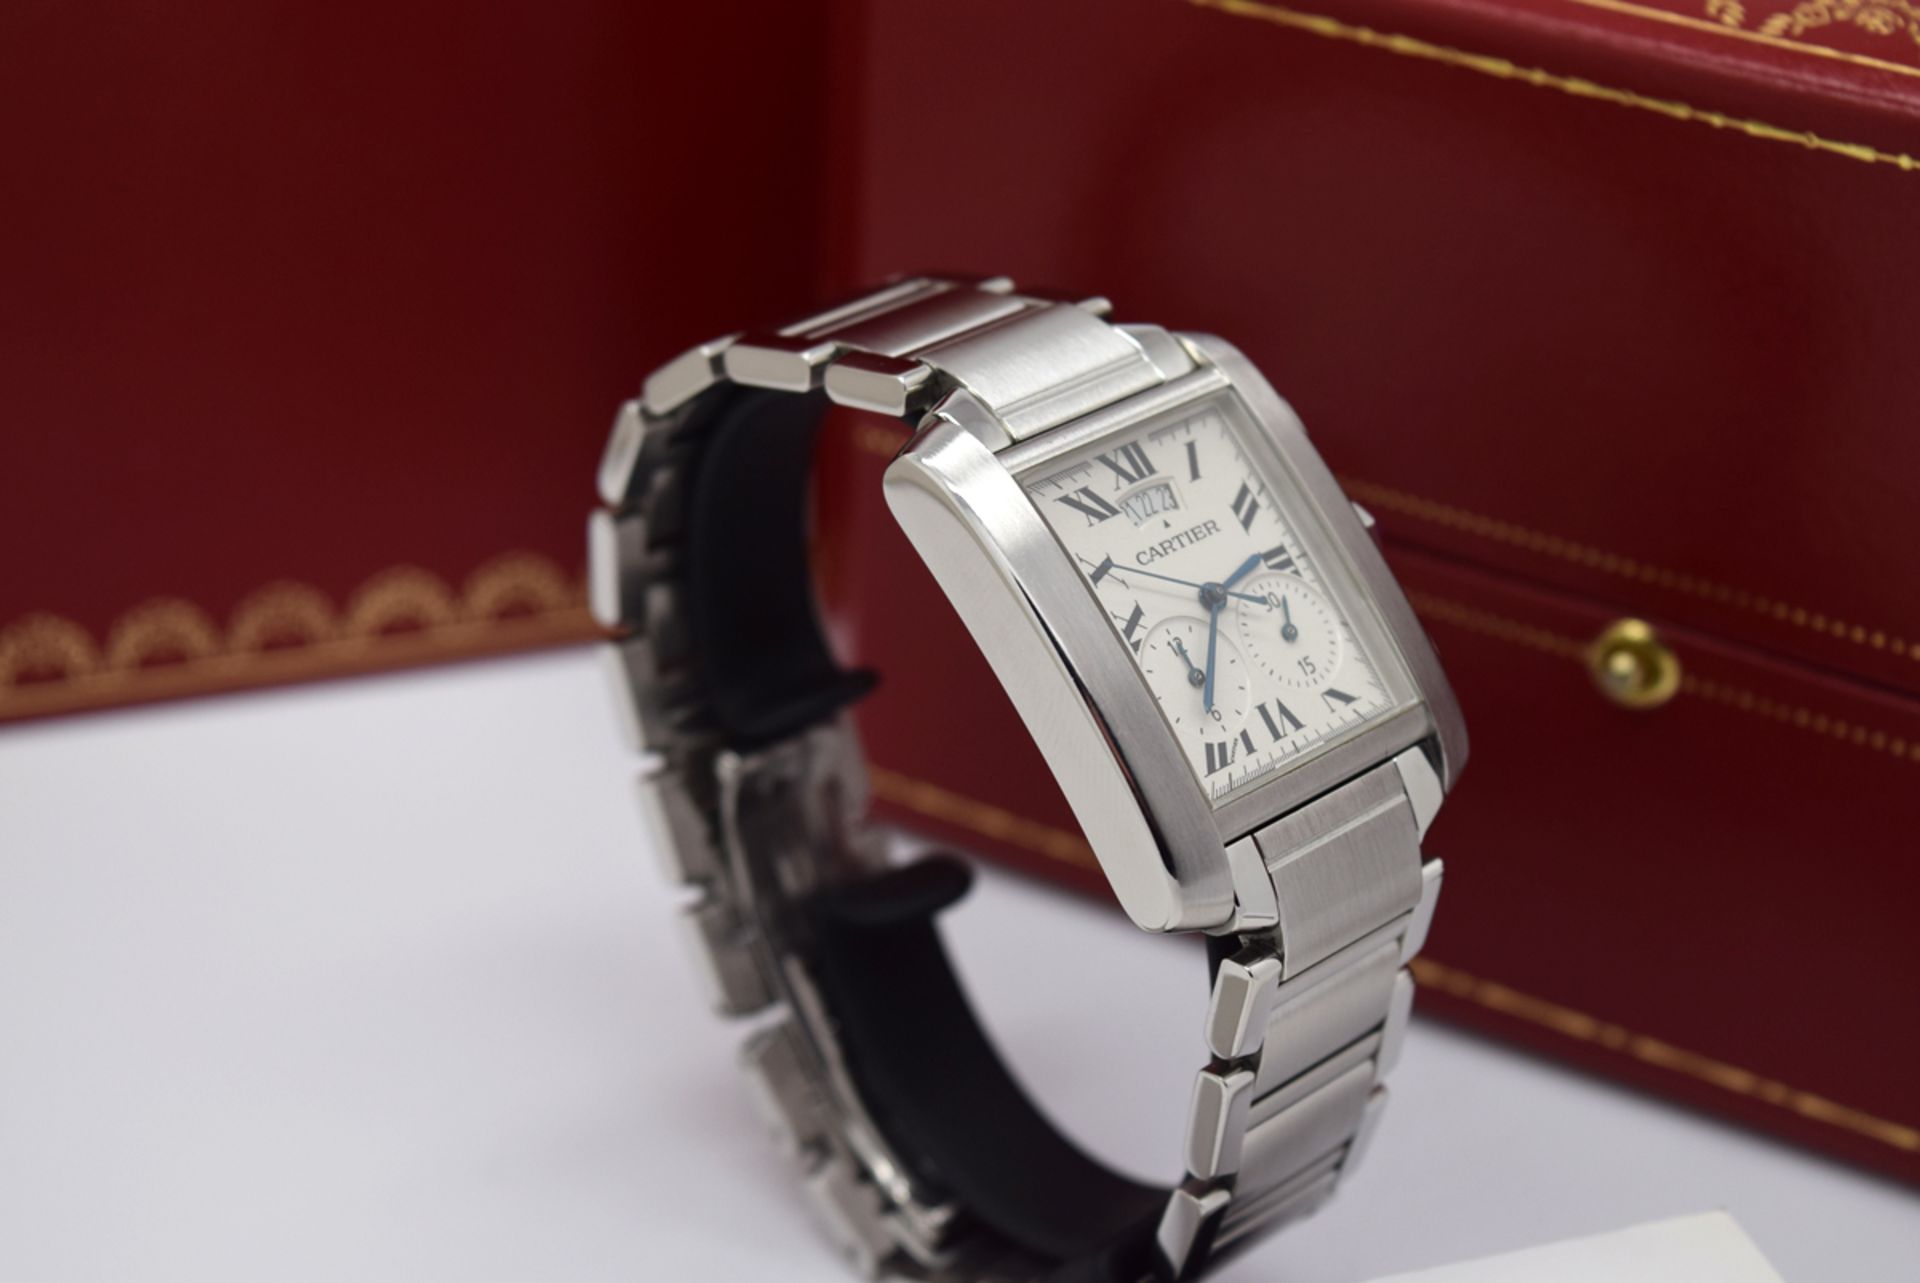 MENS CARTIER TANK CHRONOGRAPH - STAINLESS STEEL - BOX & PAPERS! - Image 6 of 12